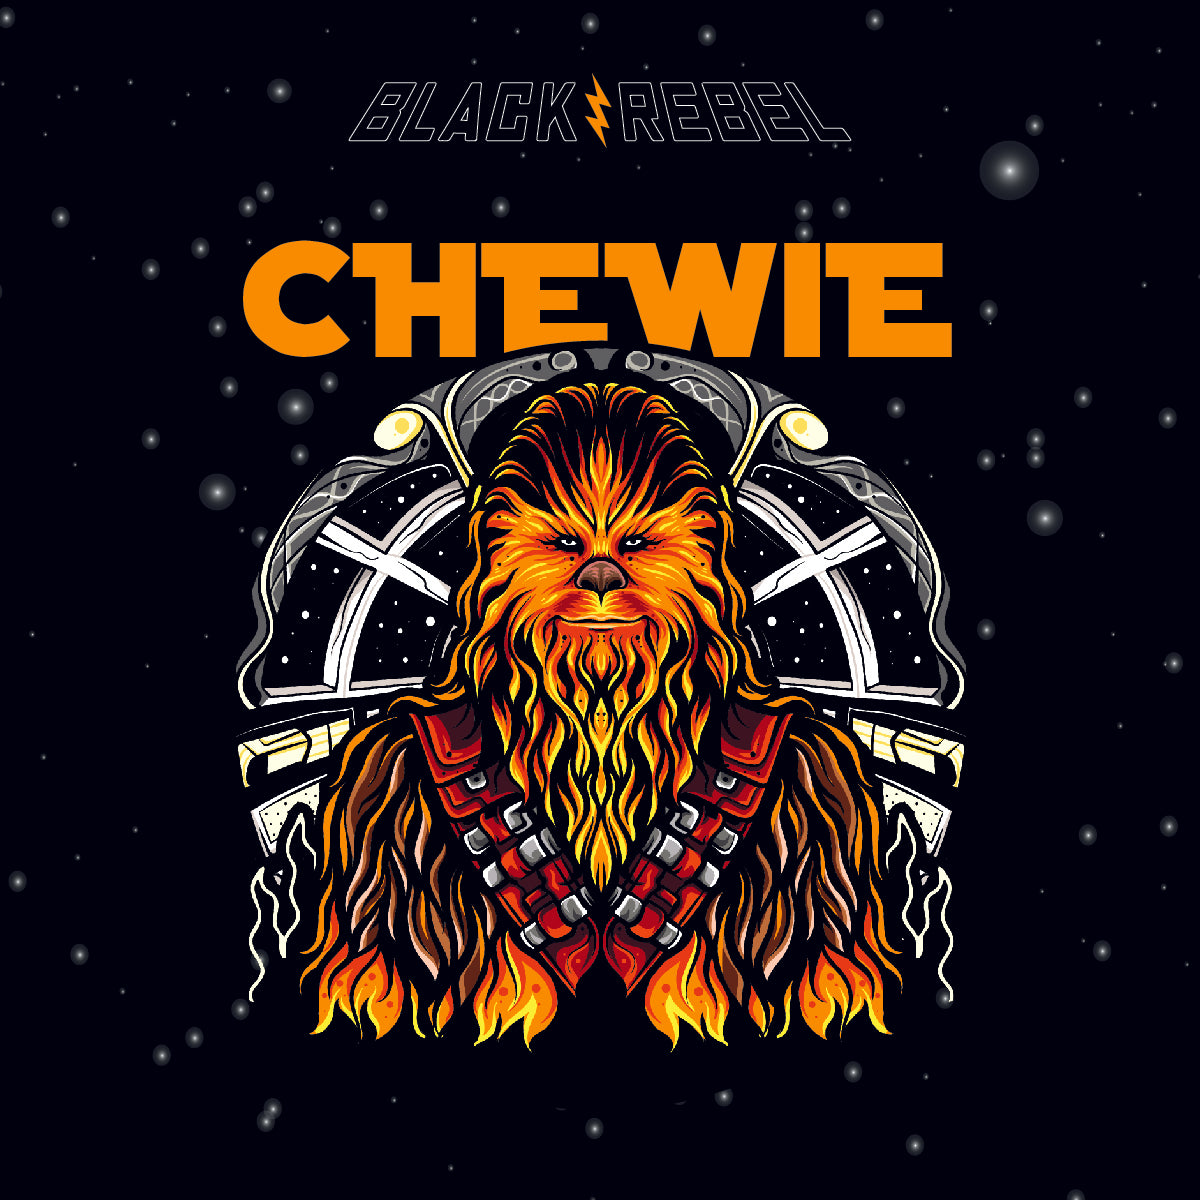 THE CHEWIE